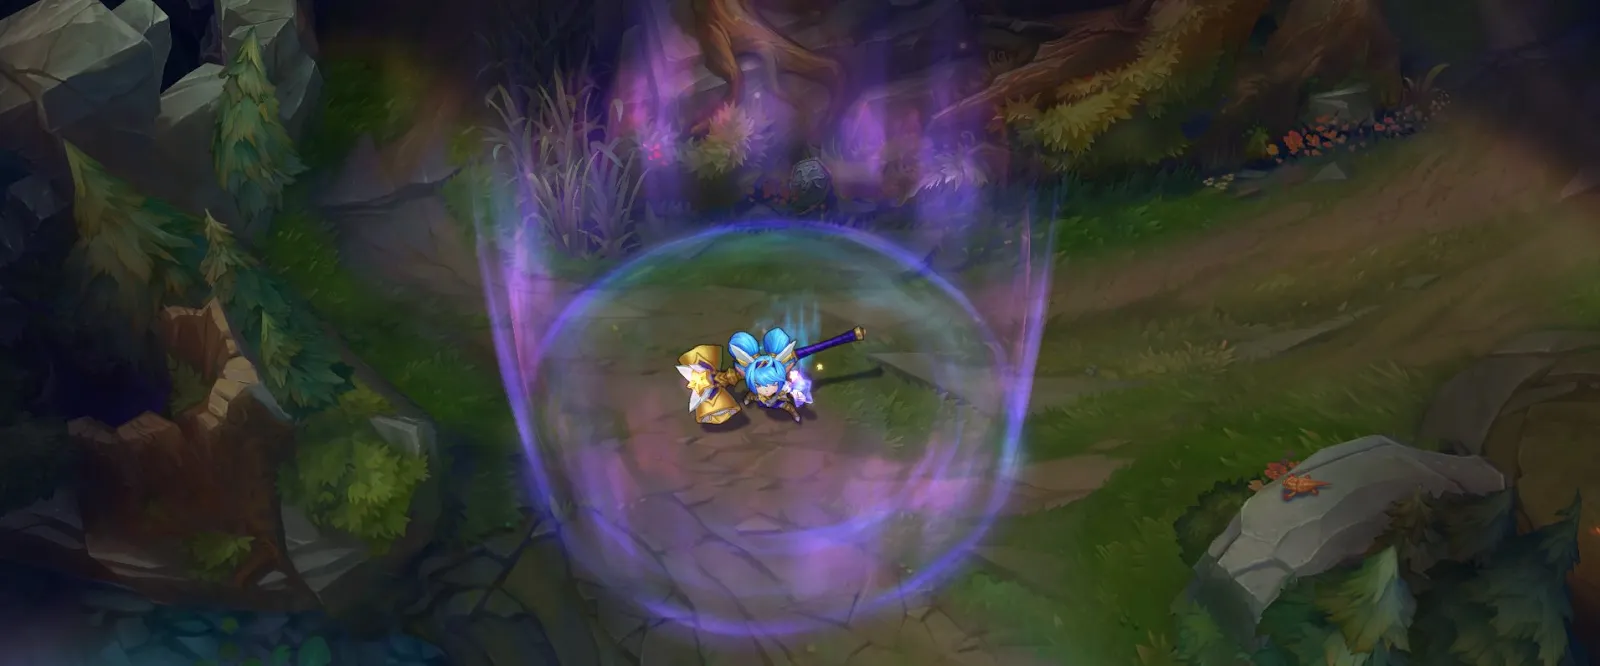 Star Guardian Poppy being surrounded by an aurora